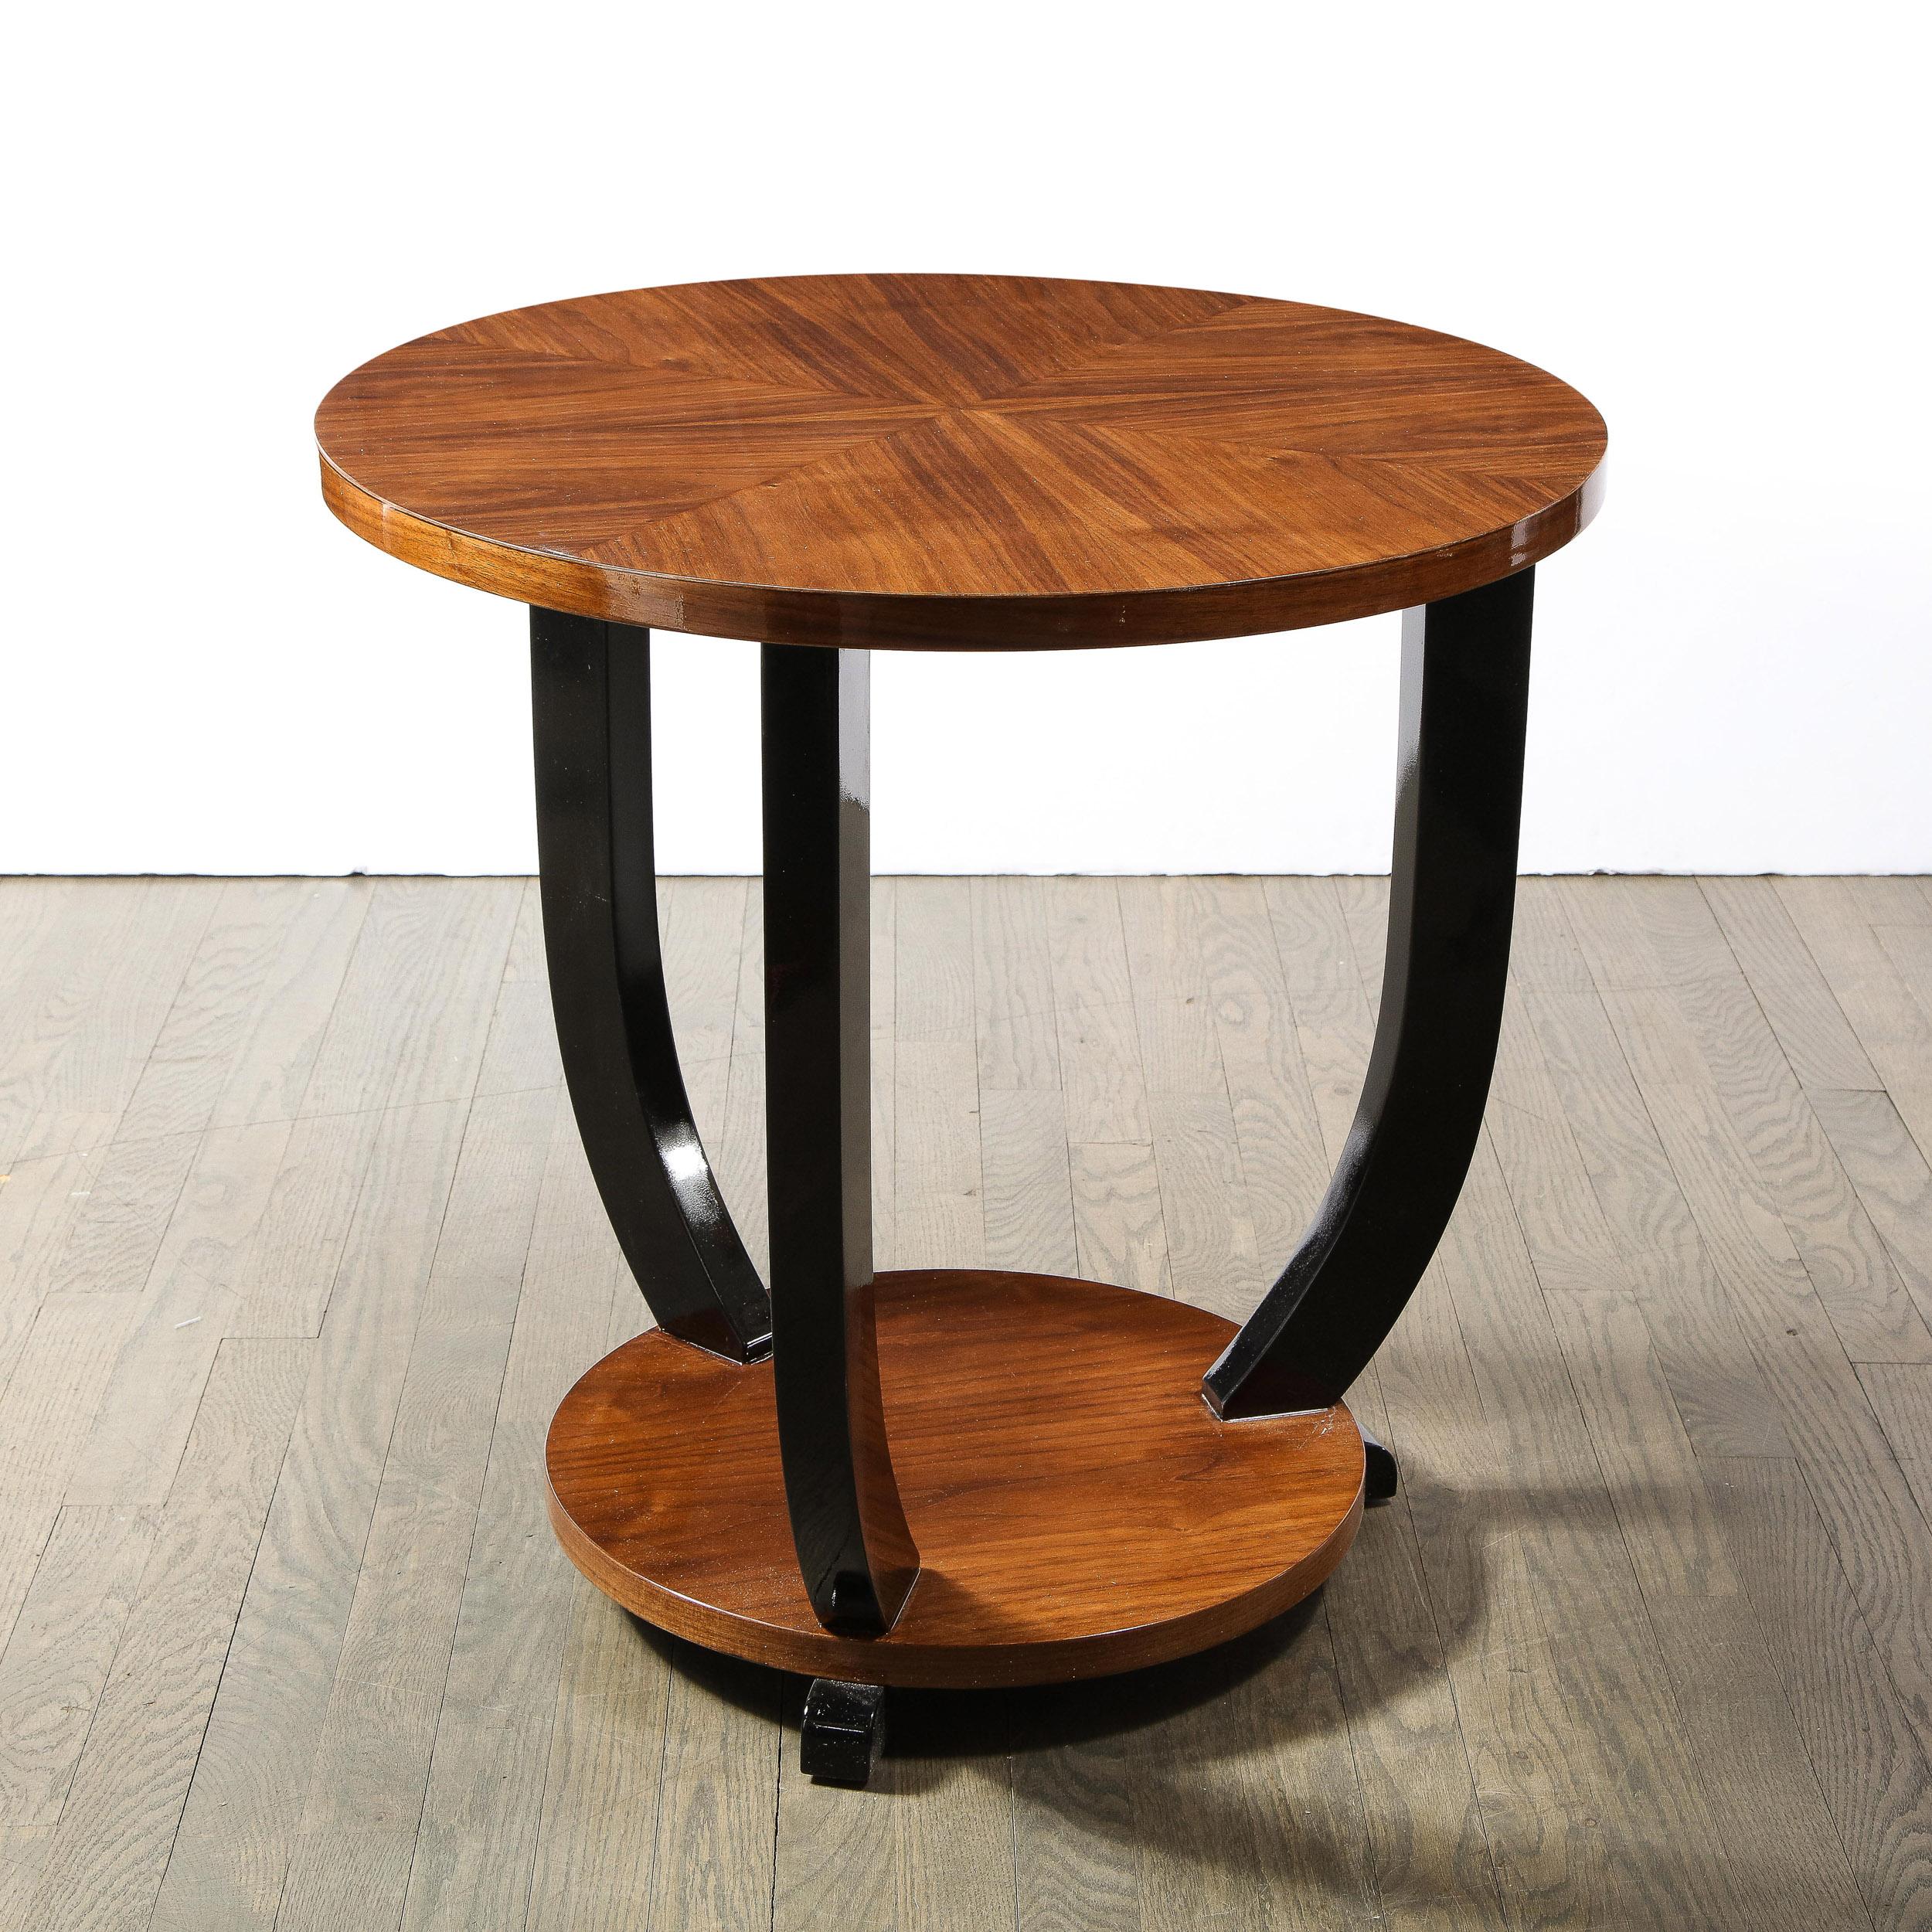 French Art Deco Two-Tiered Bookmatched Walnut & Black Lacquer Gueridon Table For Sale 6